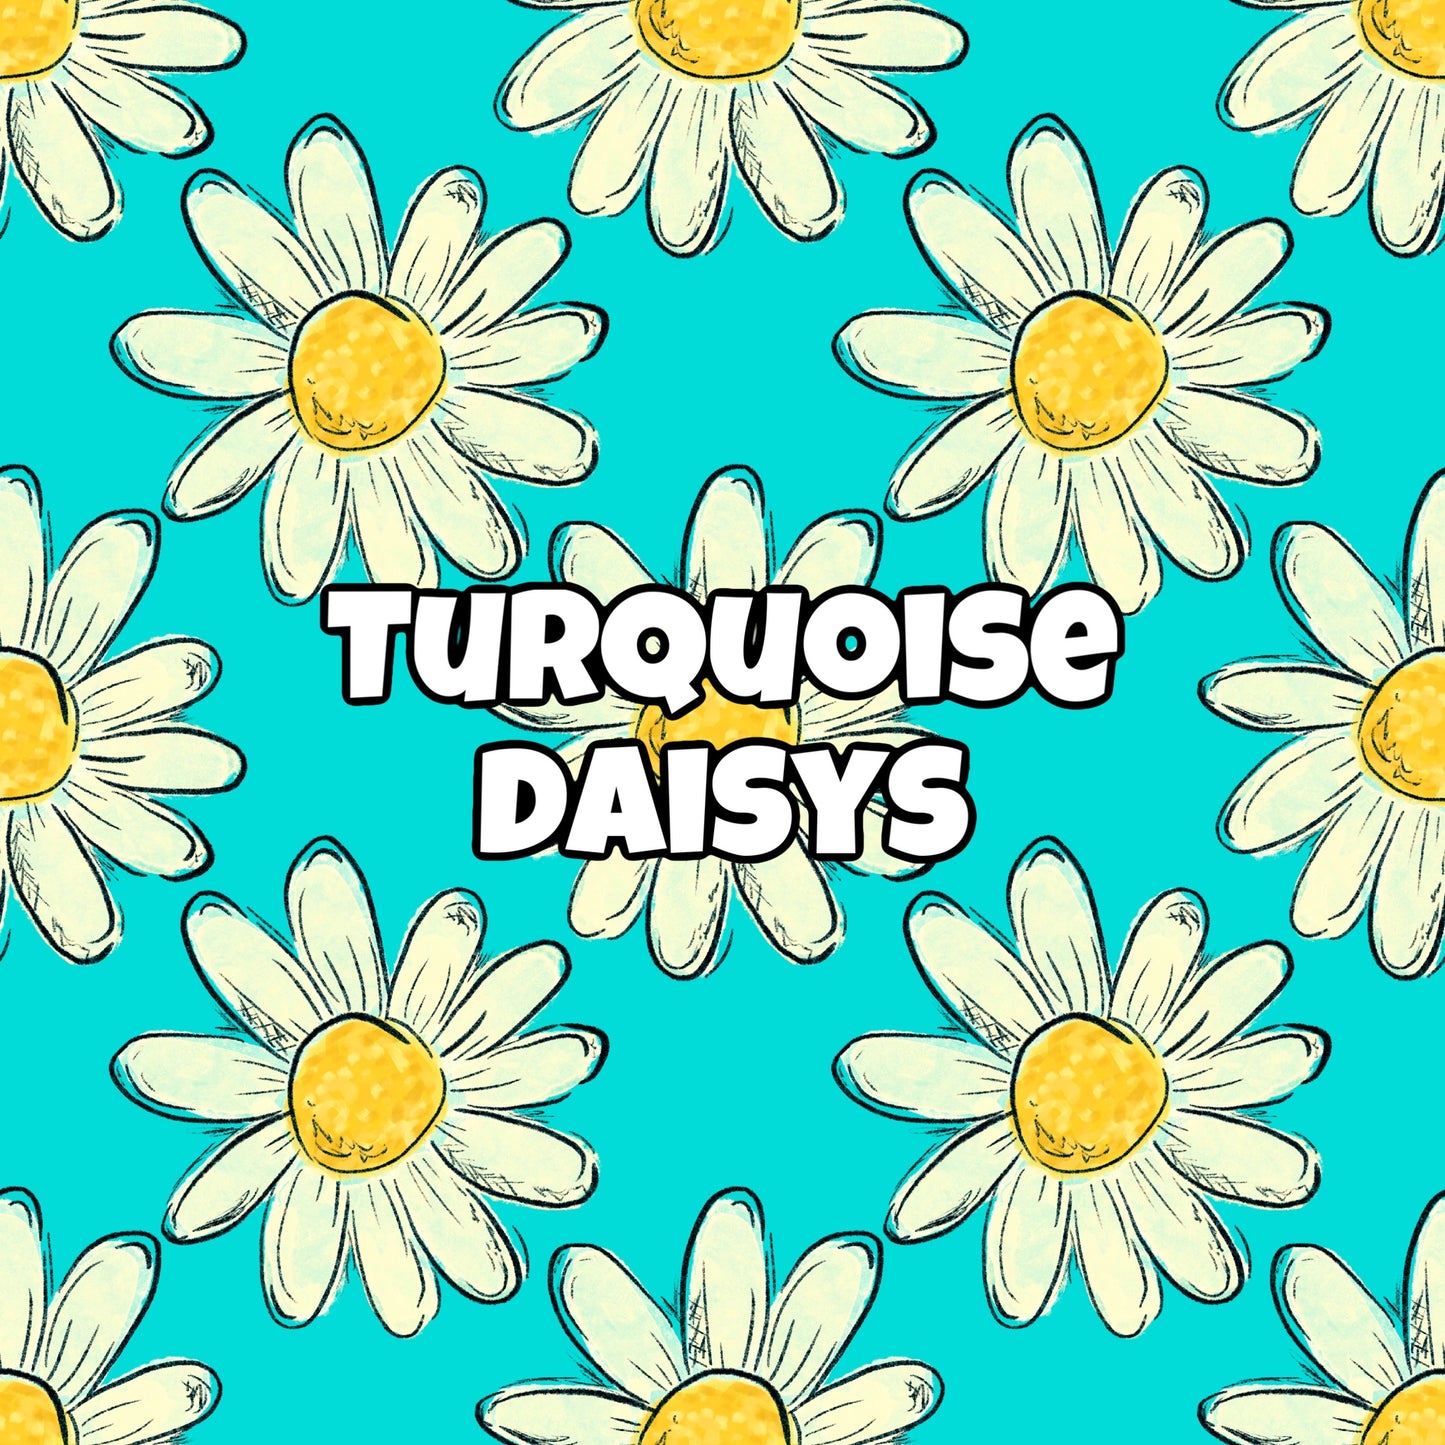 TURQUOISE DAISYS